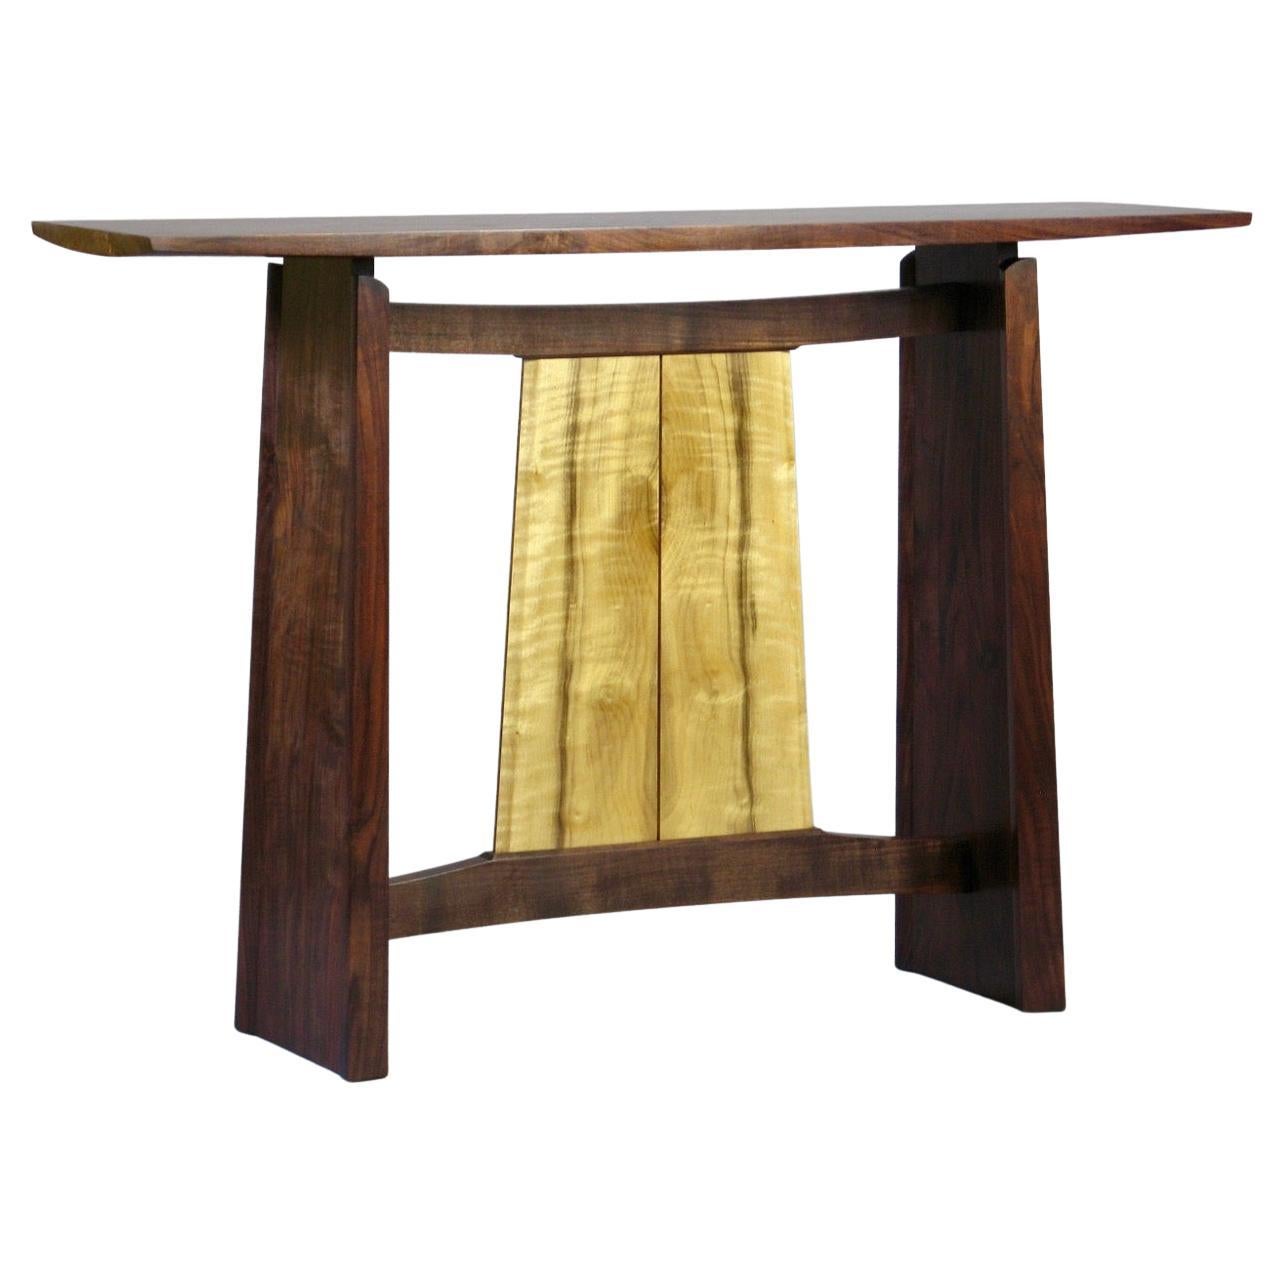 Walnut and Myrtle Console Table by Thomas Throop/ Black Creek Designs - In Stock